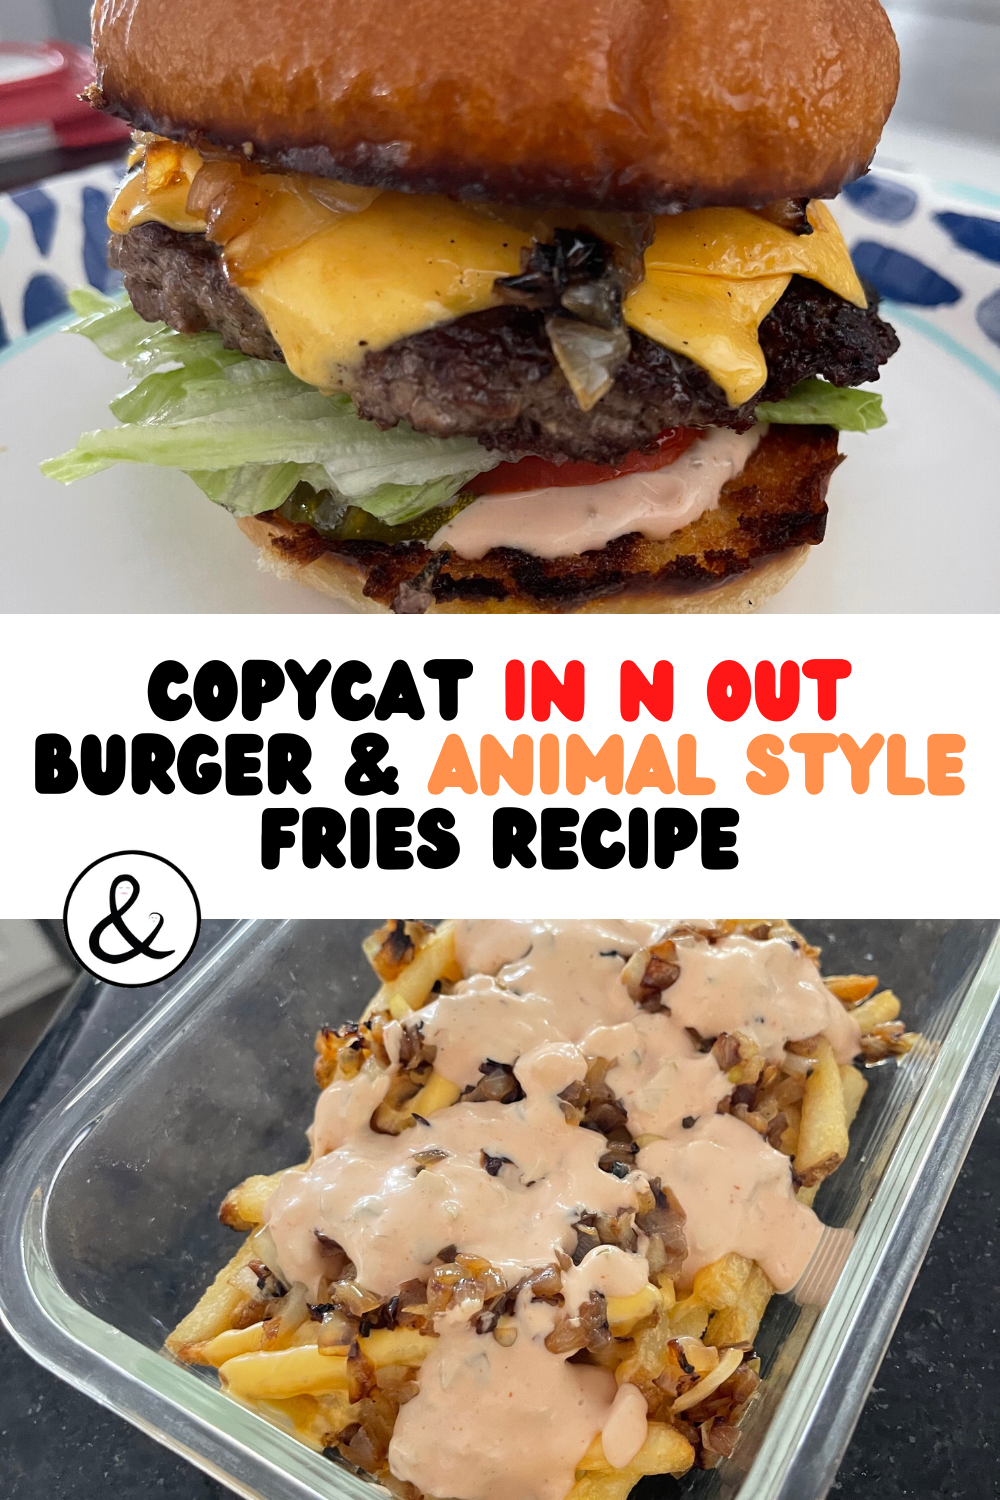 Copycat In N Out Burger & Animal Style Fries Recipe